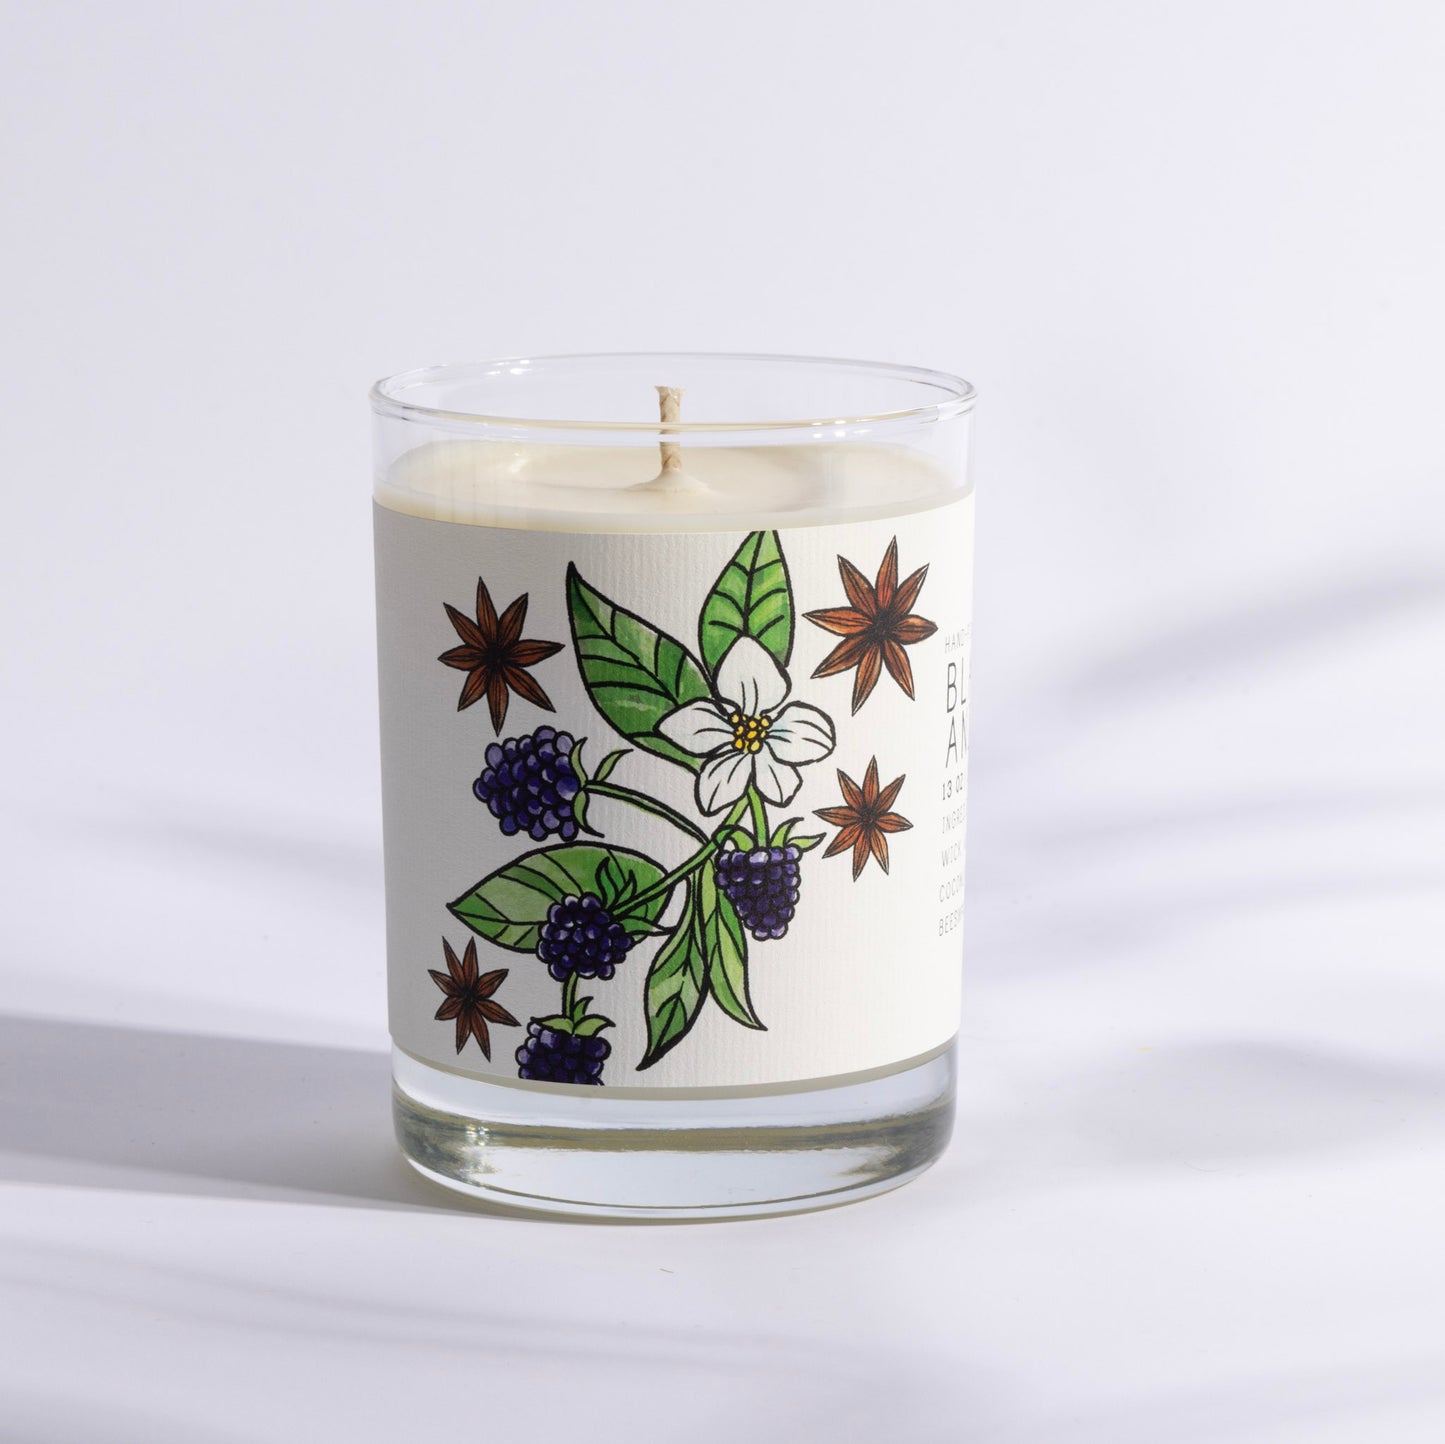 Blackberry Anise - Just Bee Candles